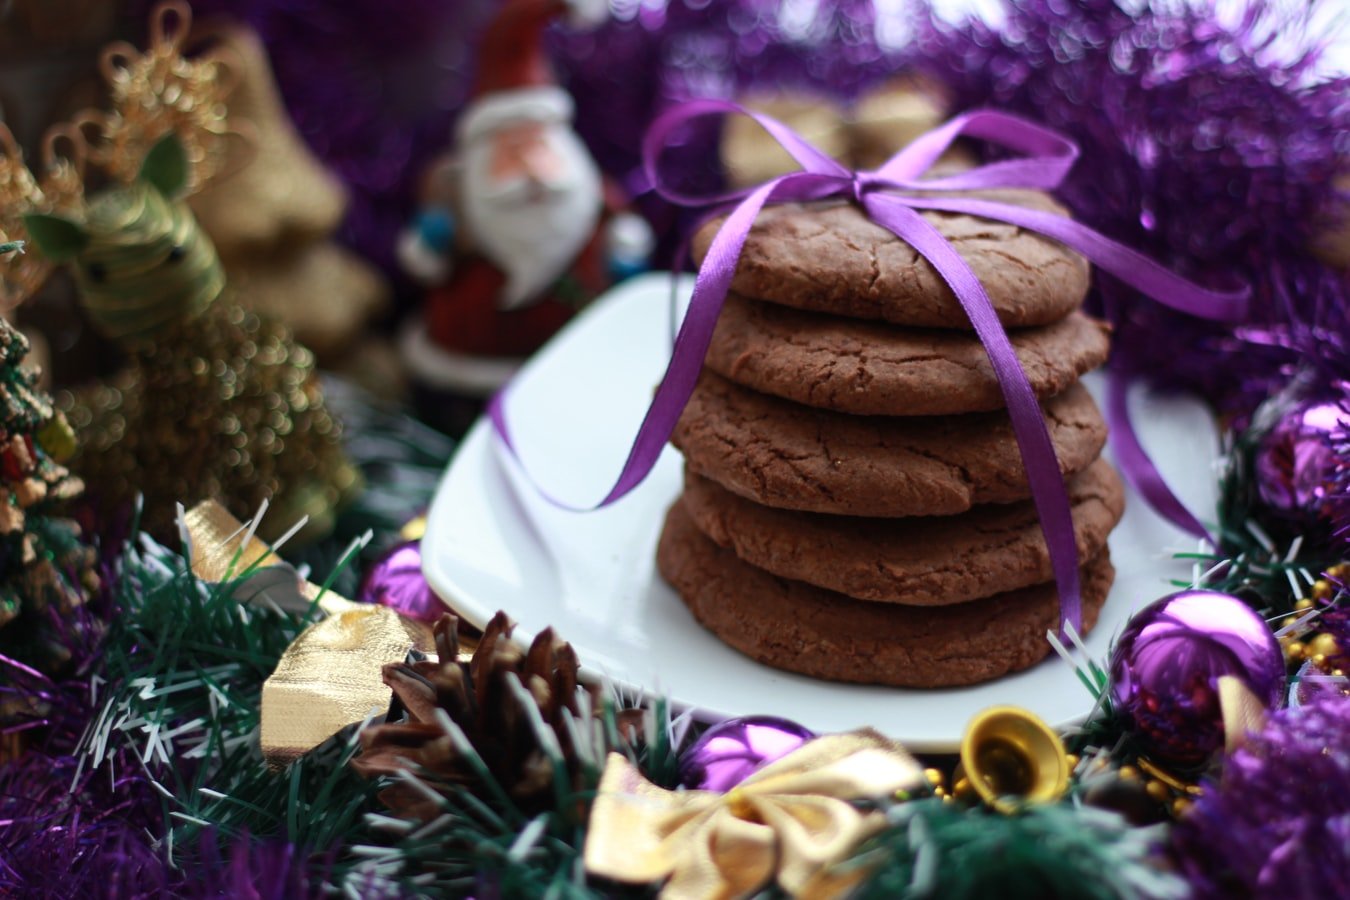 The cookie was indeed a special one! | Photo: Unsplash/Gubarieva